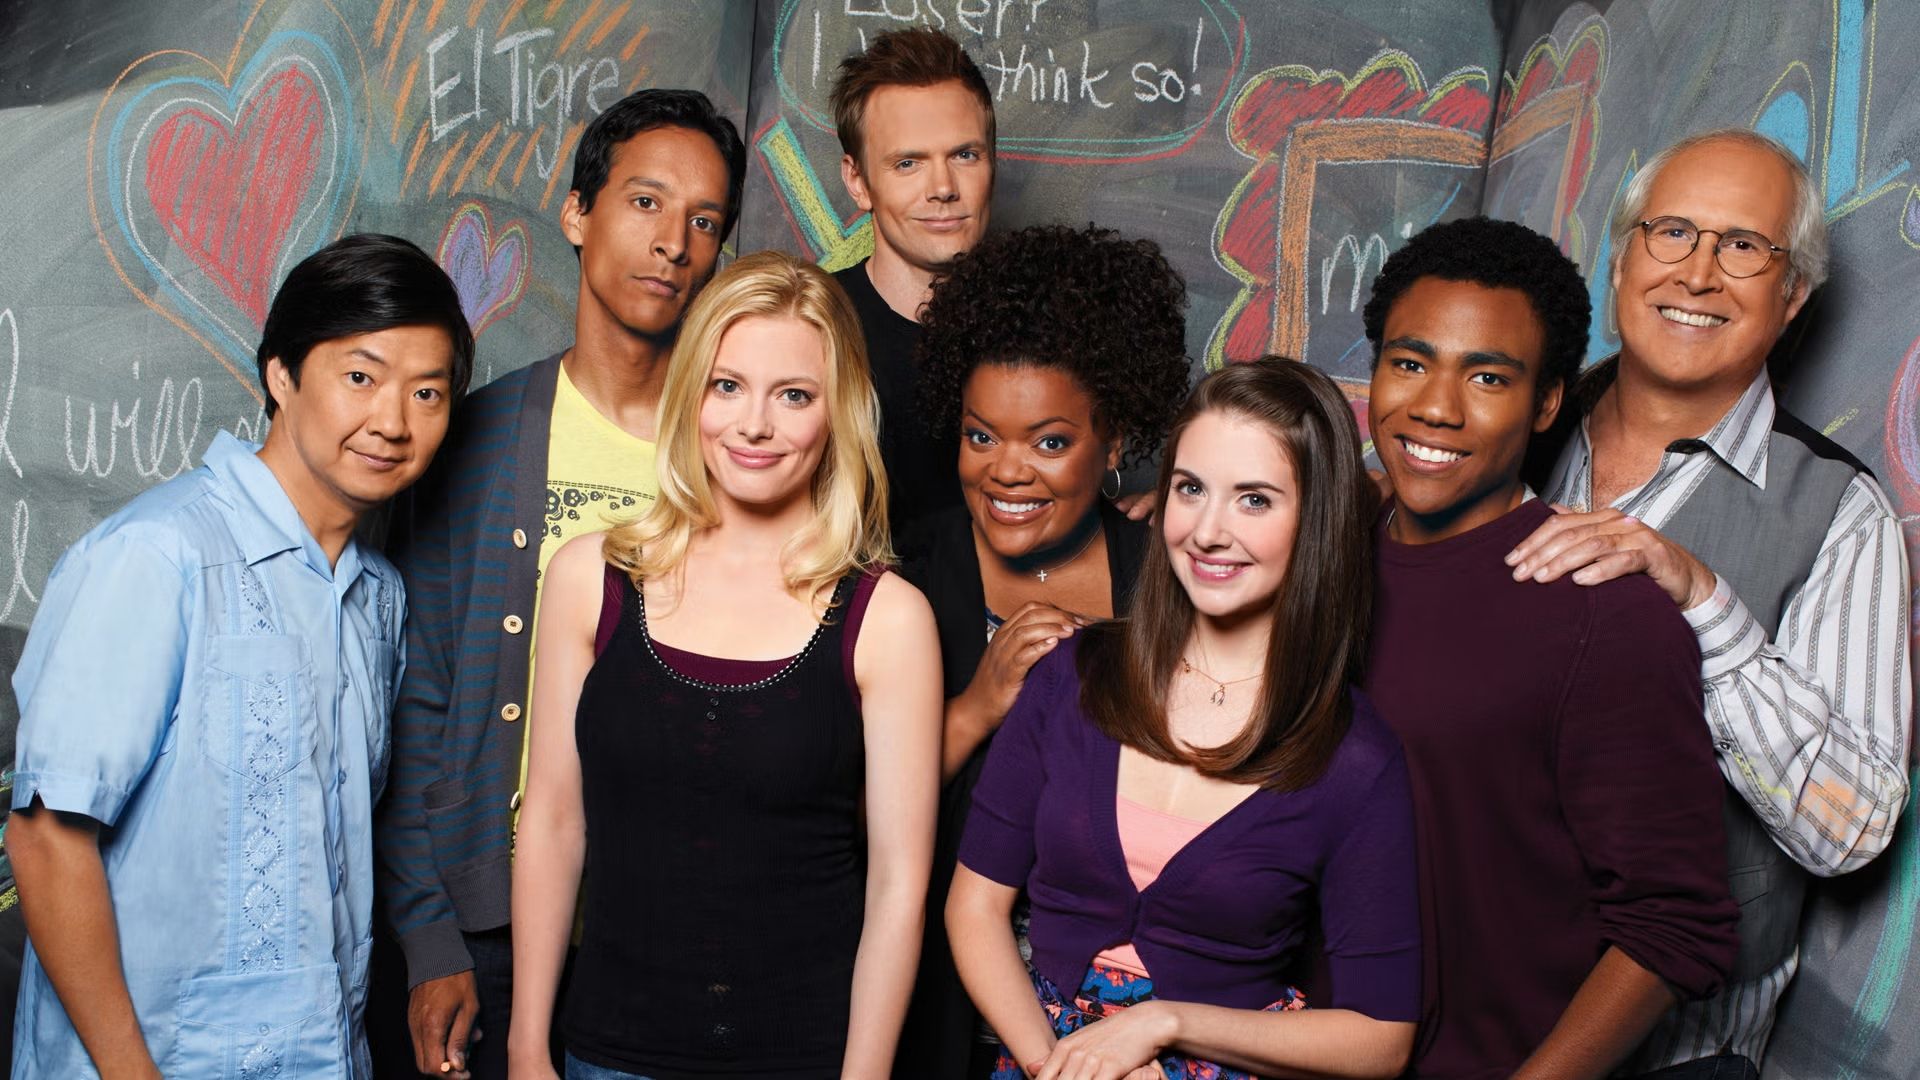 The cast of the hit TV show, Community, pose together